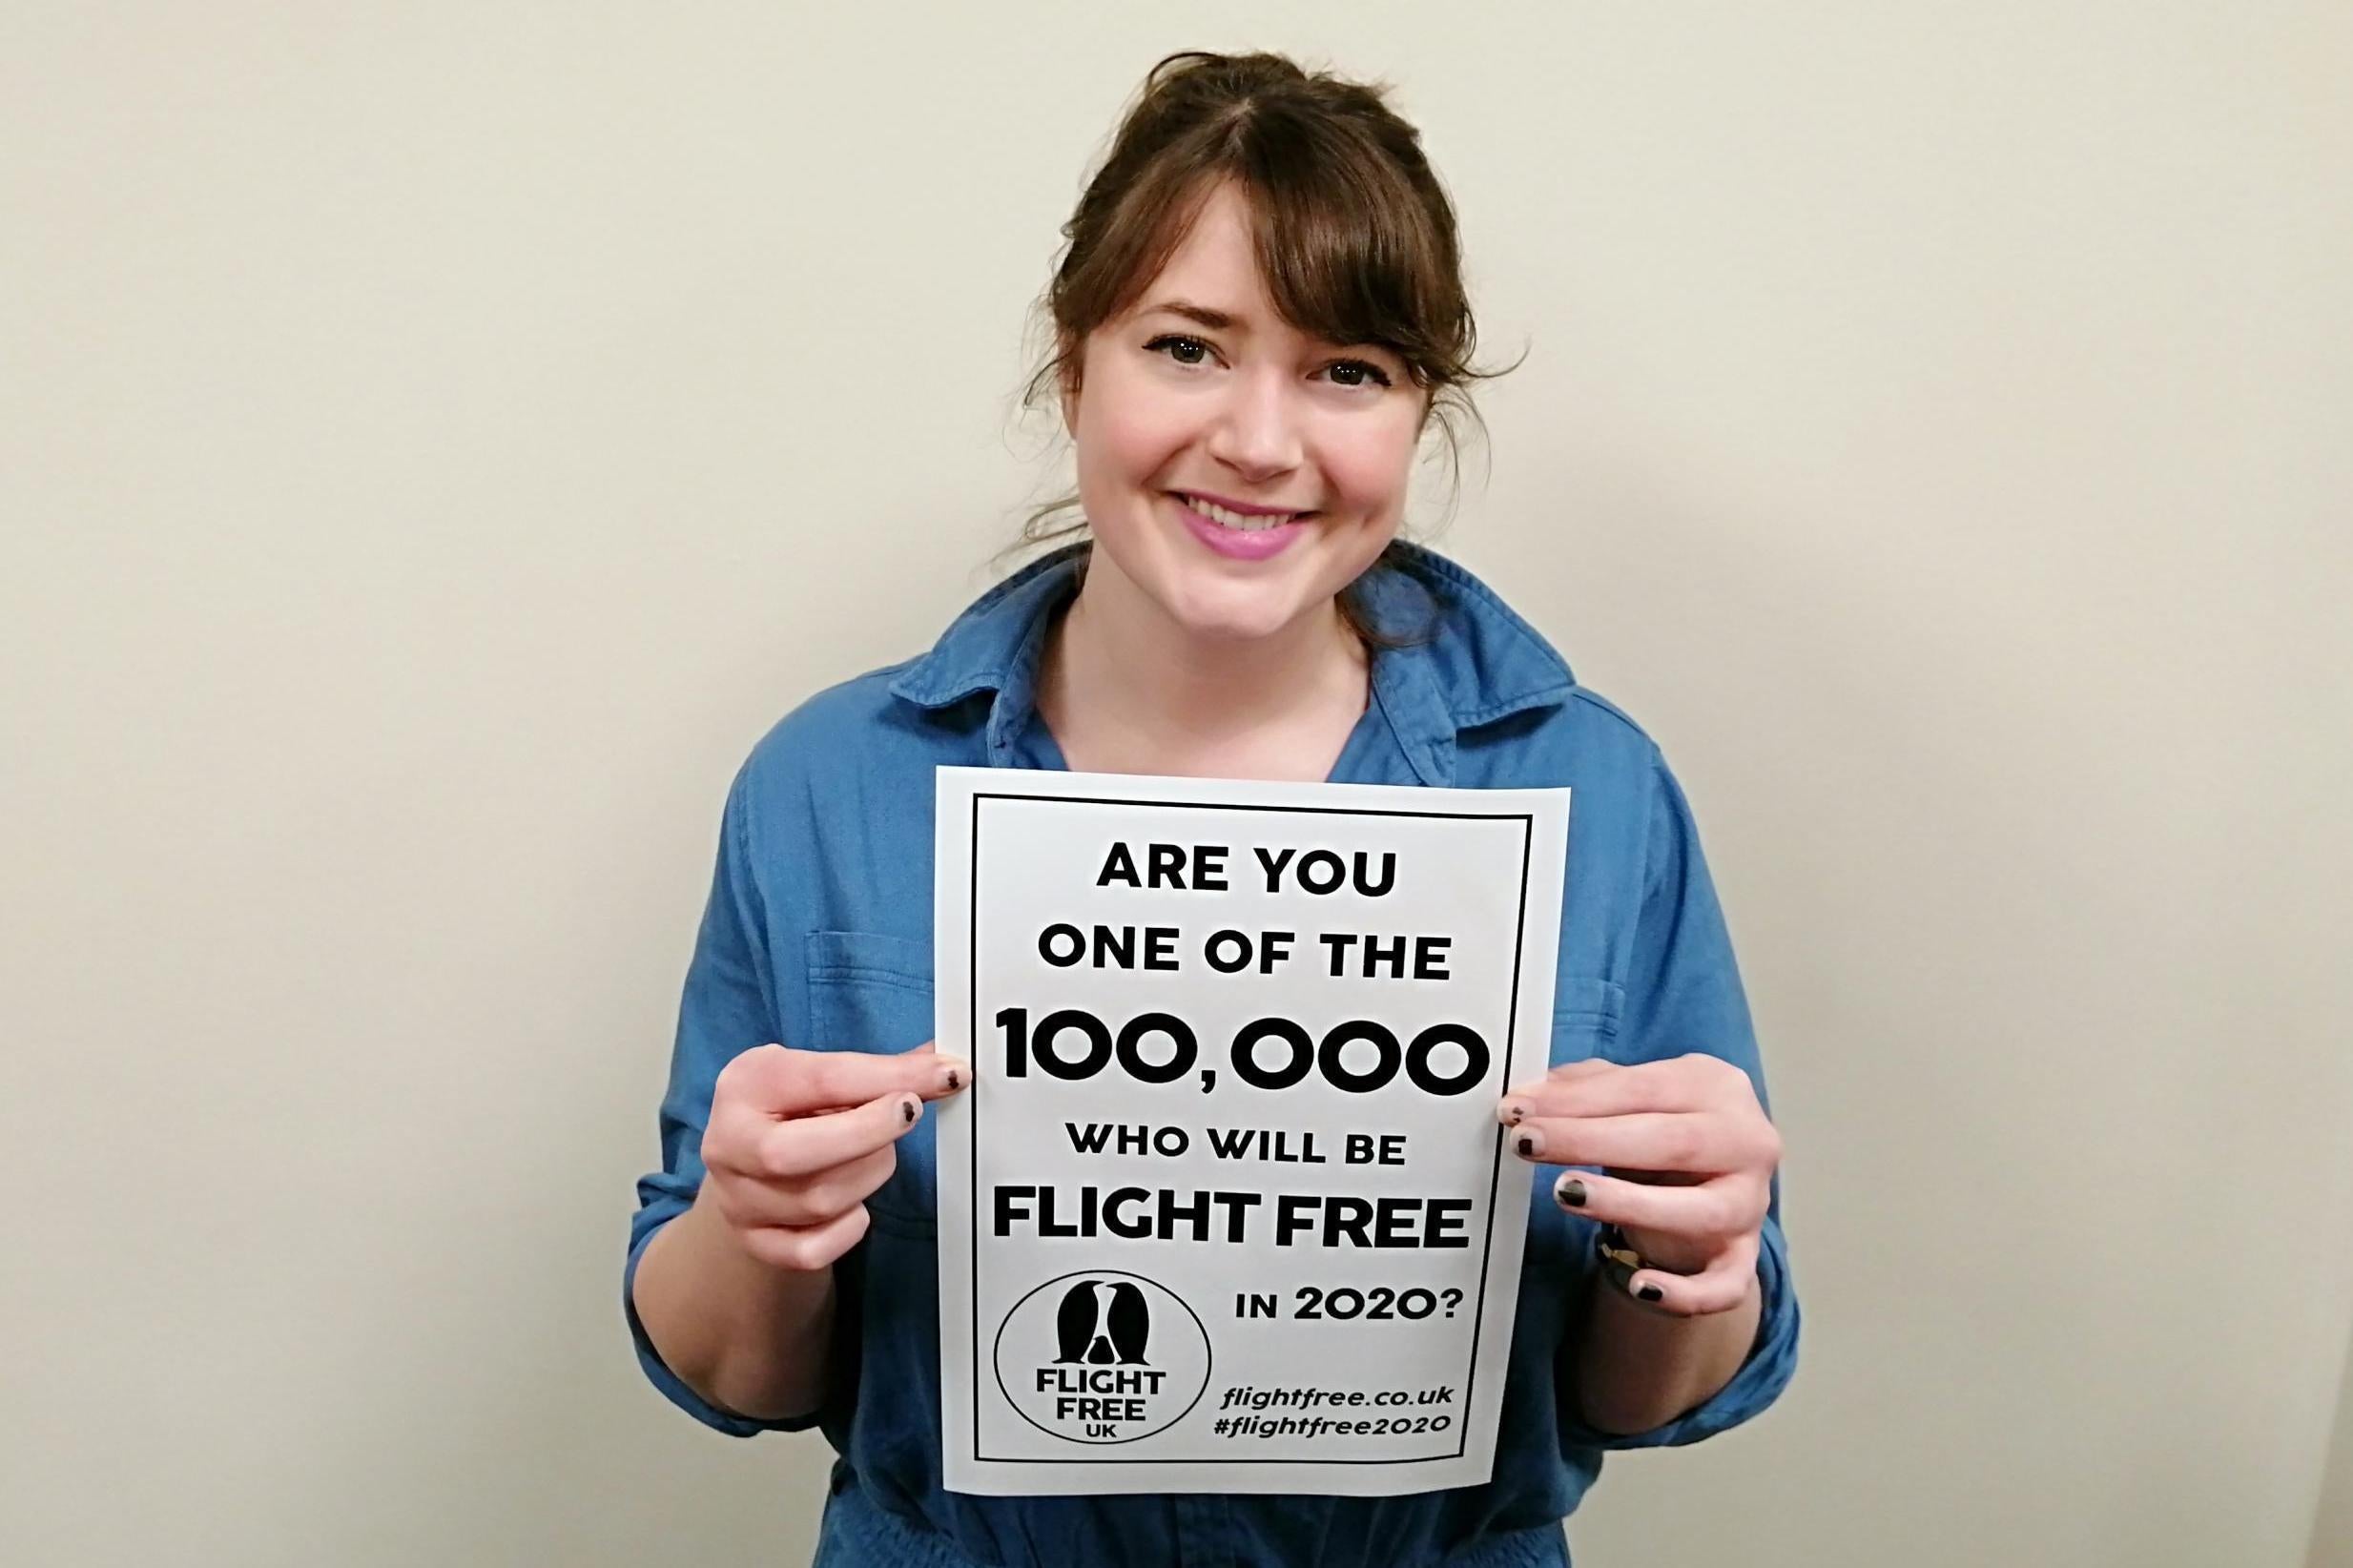 Helen Coffey has signed up to the flight-free pledge